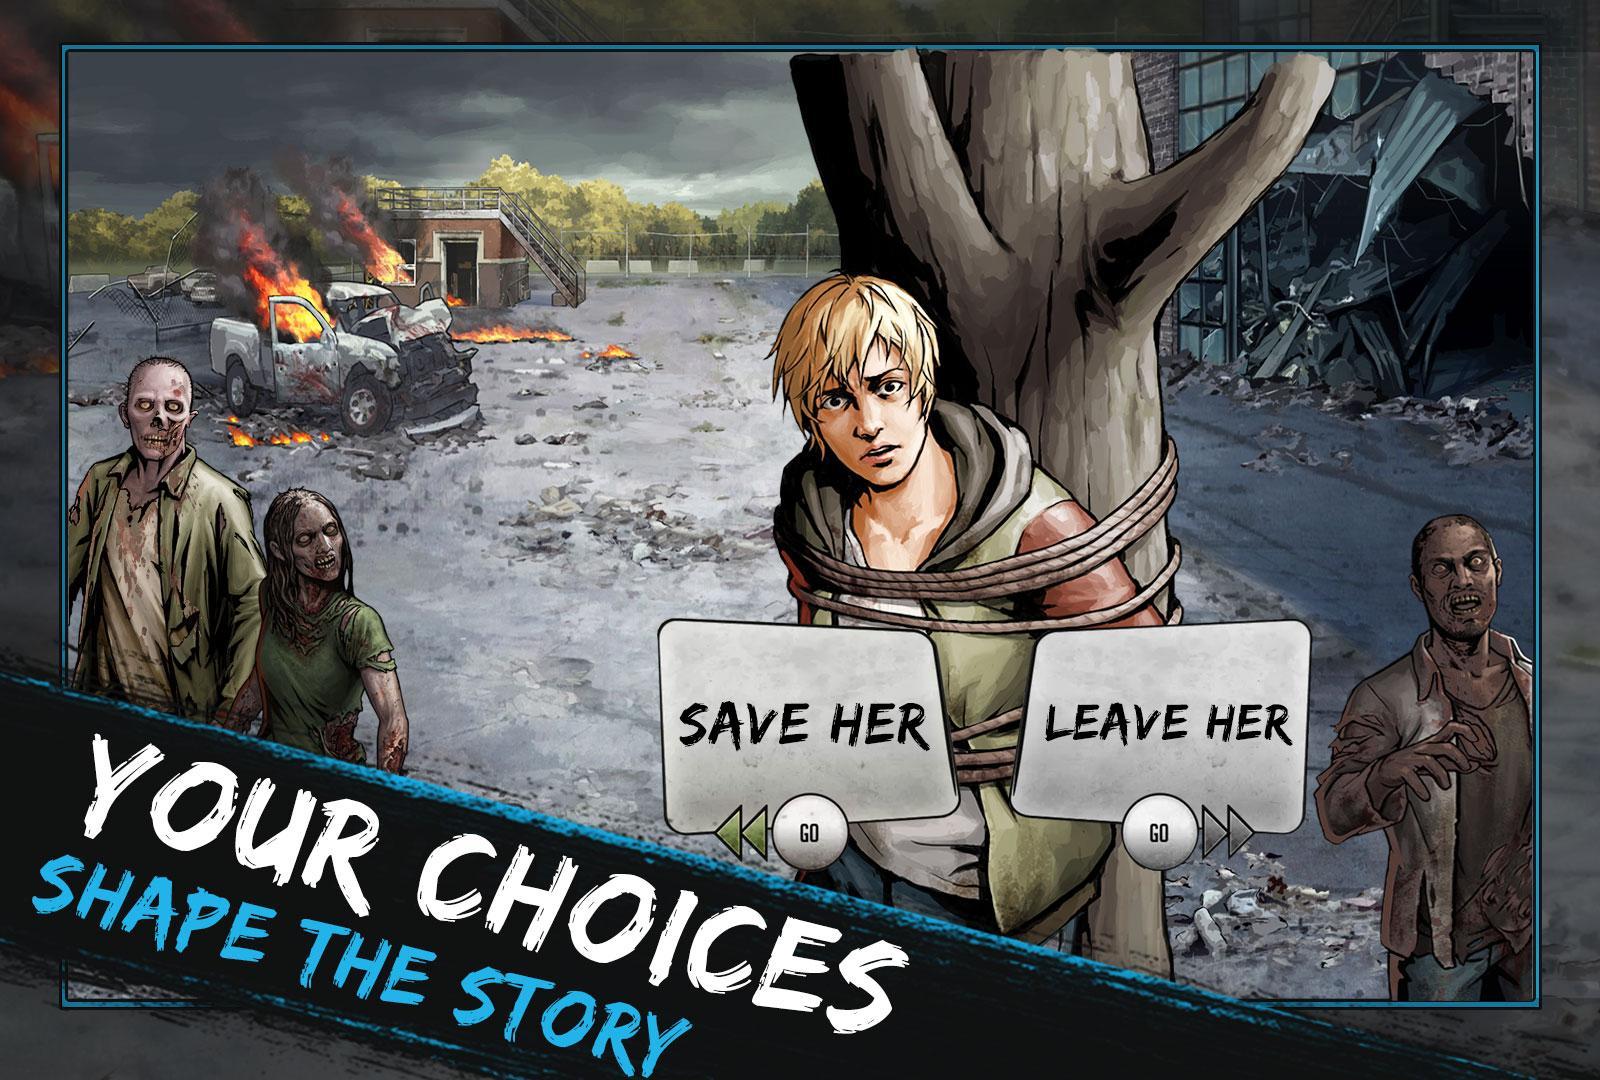 Screenshot of The Walking Dead: Road to Survival